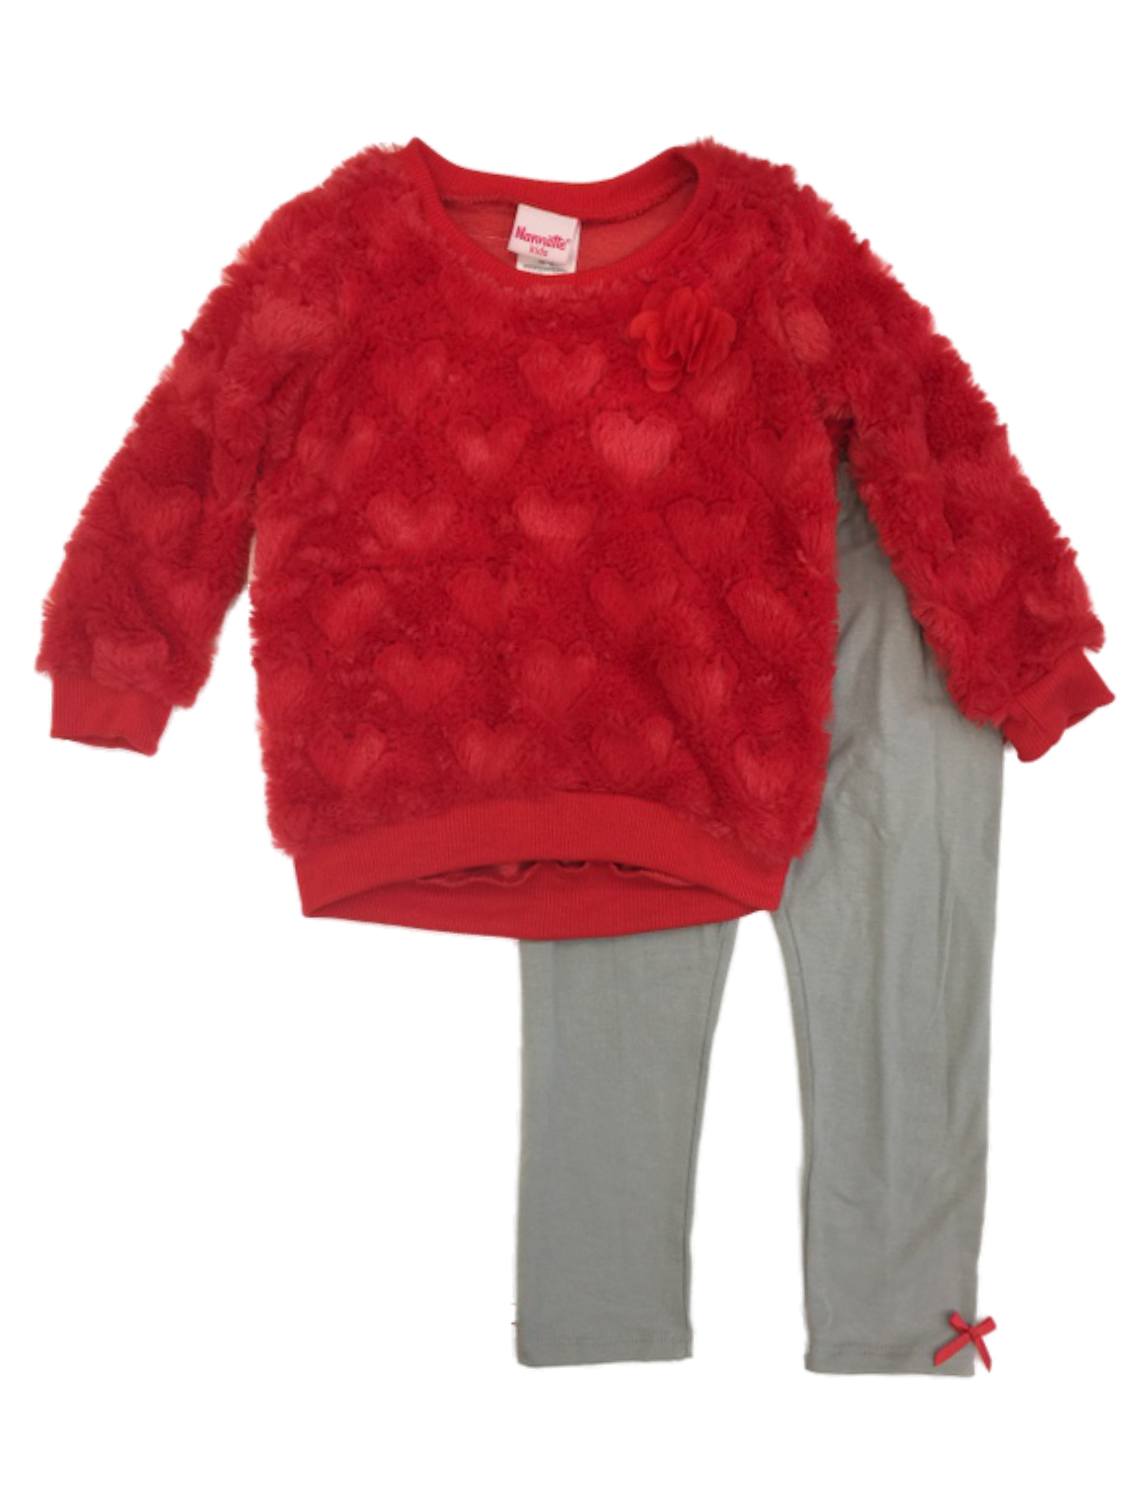 Nannette Toddler Girls Red Fuzzy Heart Sweater Shirt & Sparkly Gray Legging Outfit